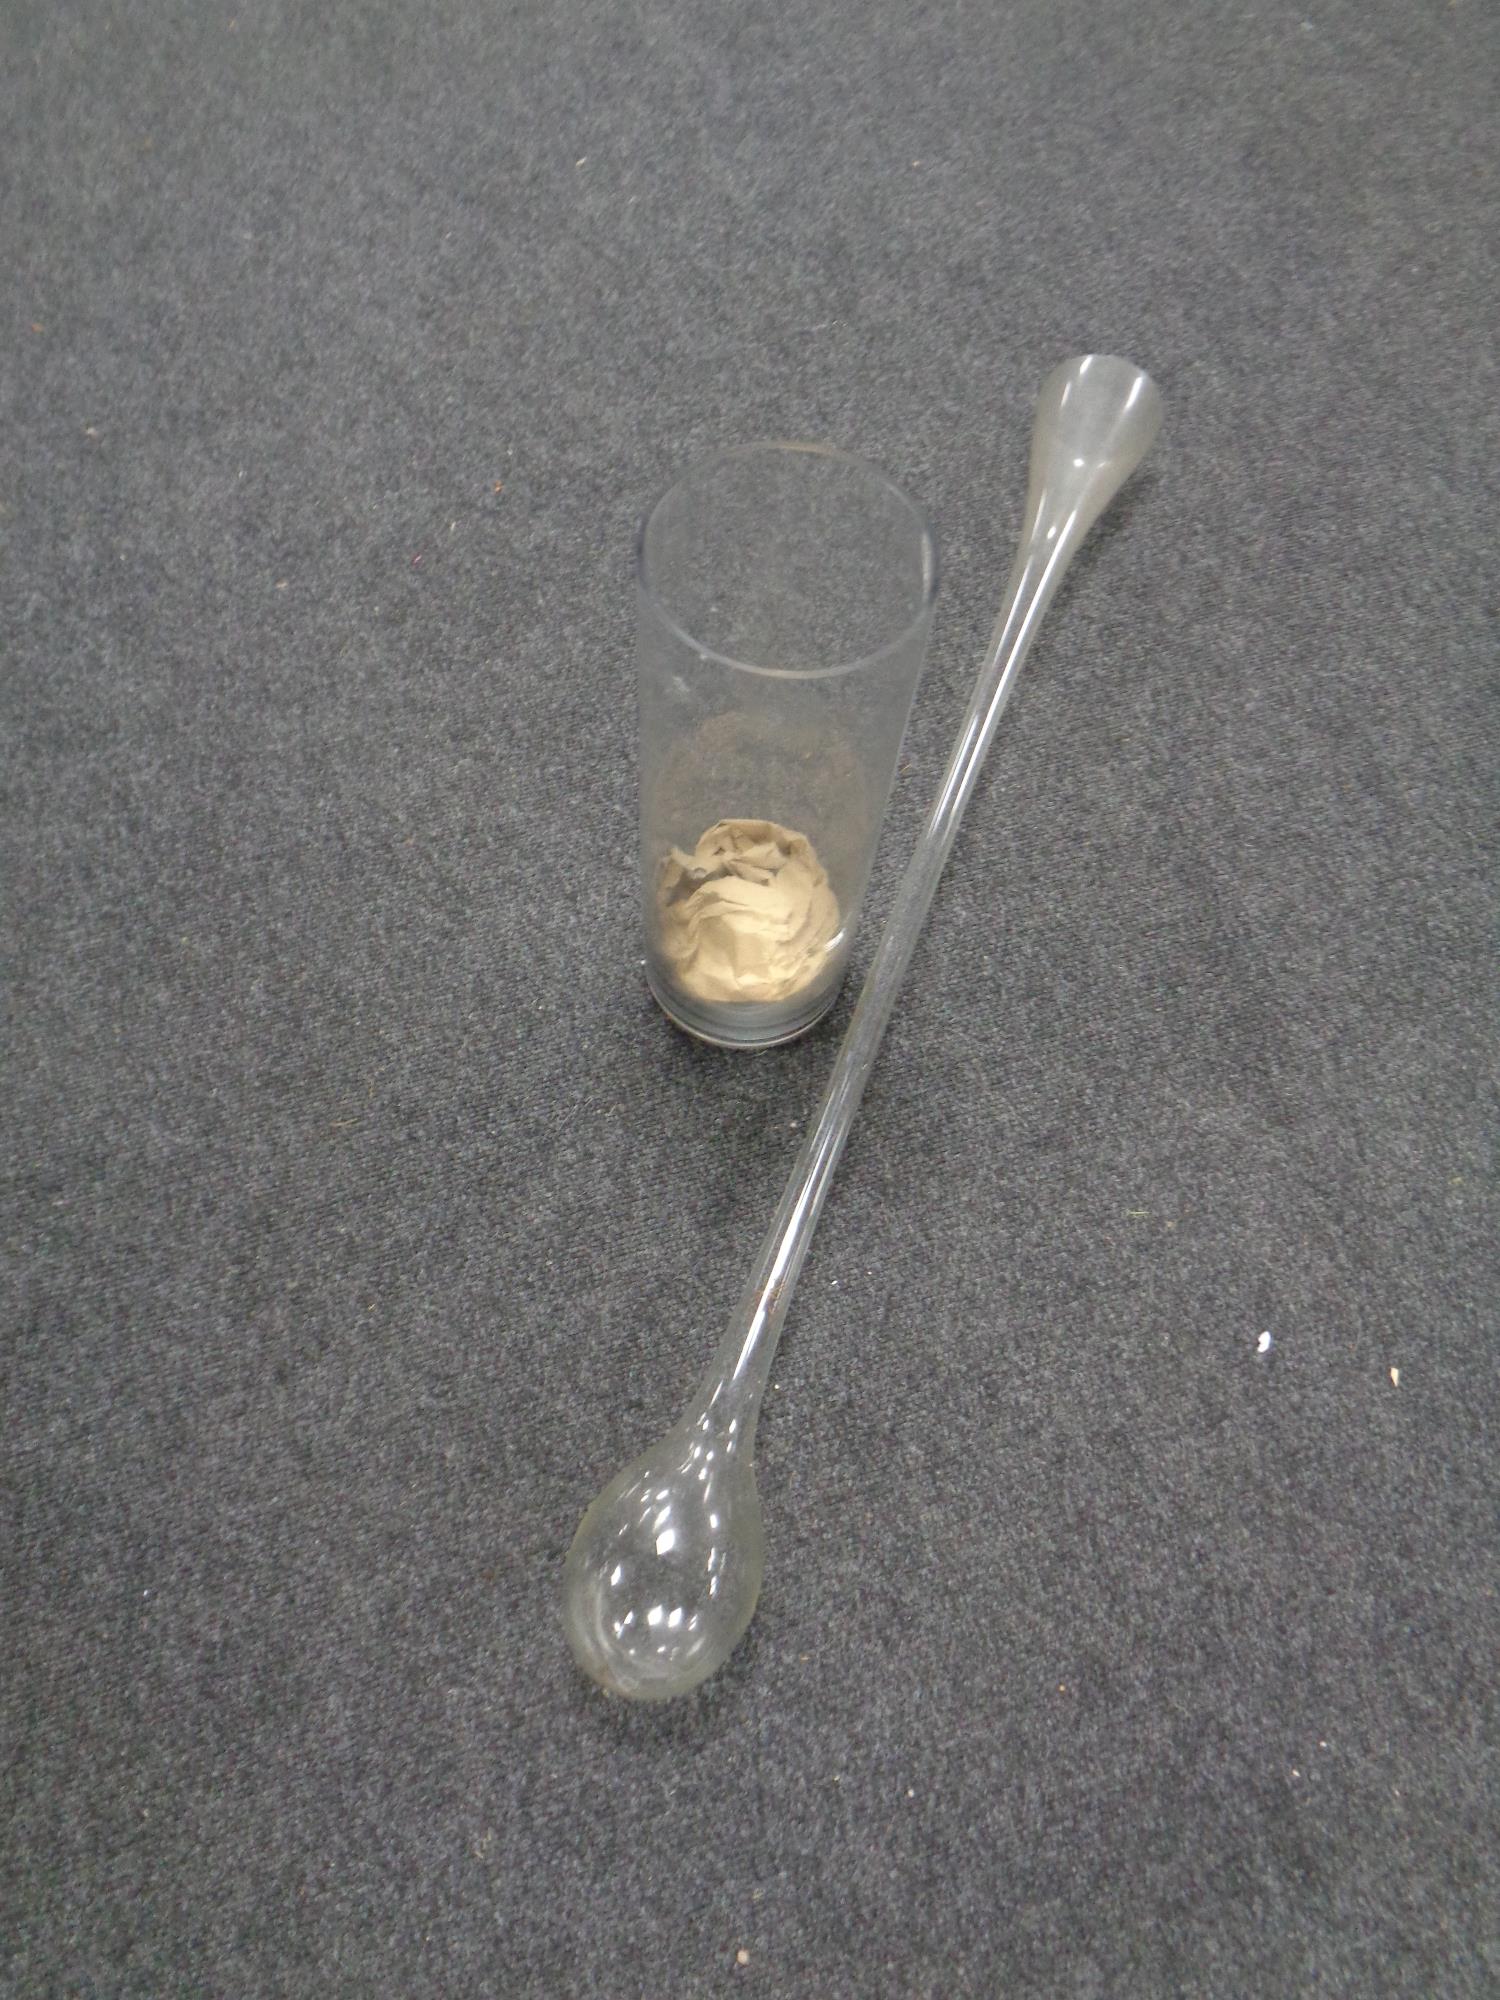 A glass yard of ale together with a glass vase